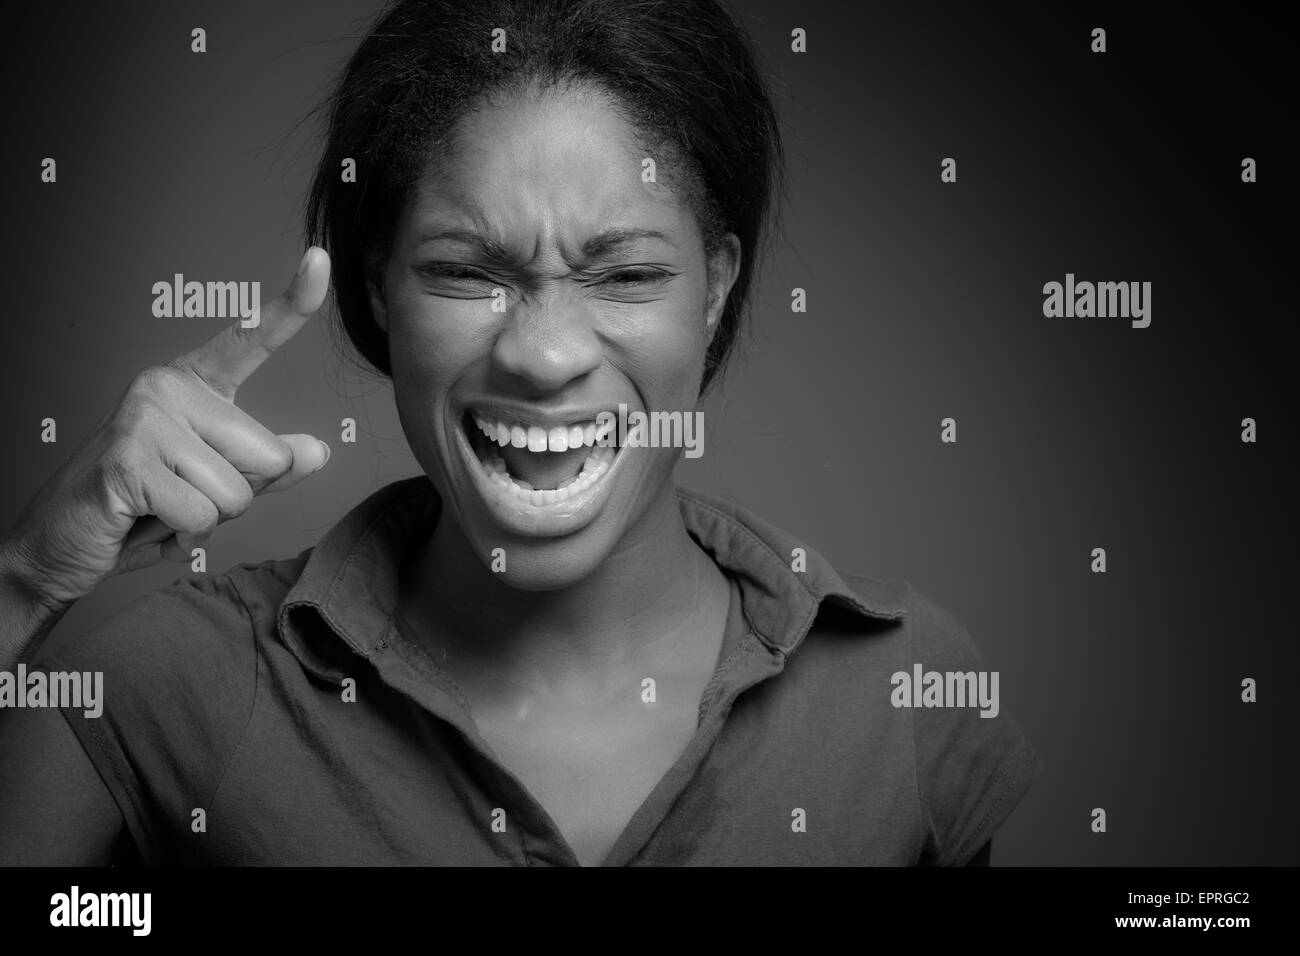 Model angry scolding and pointing Stock Photo